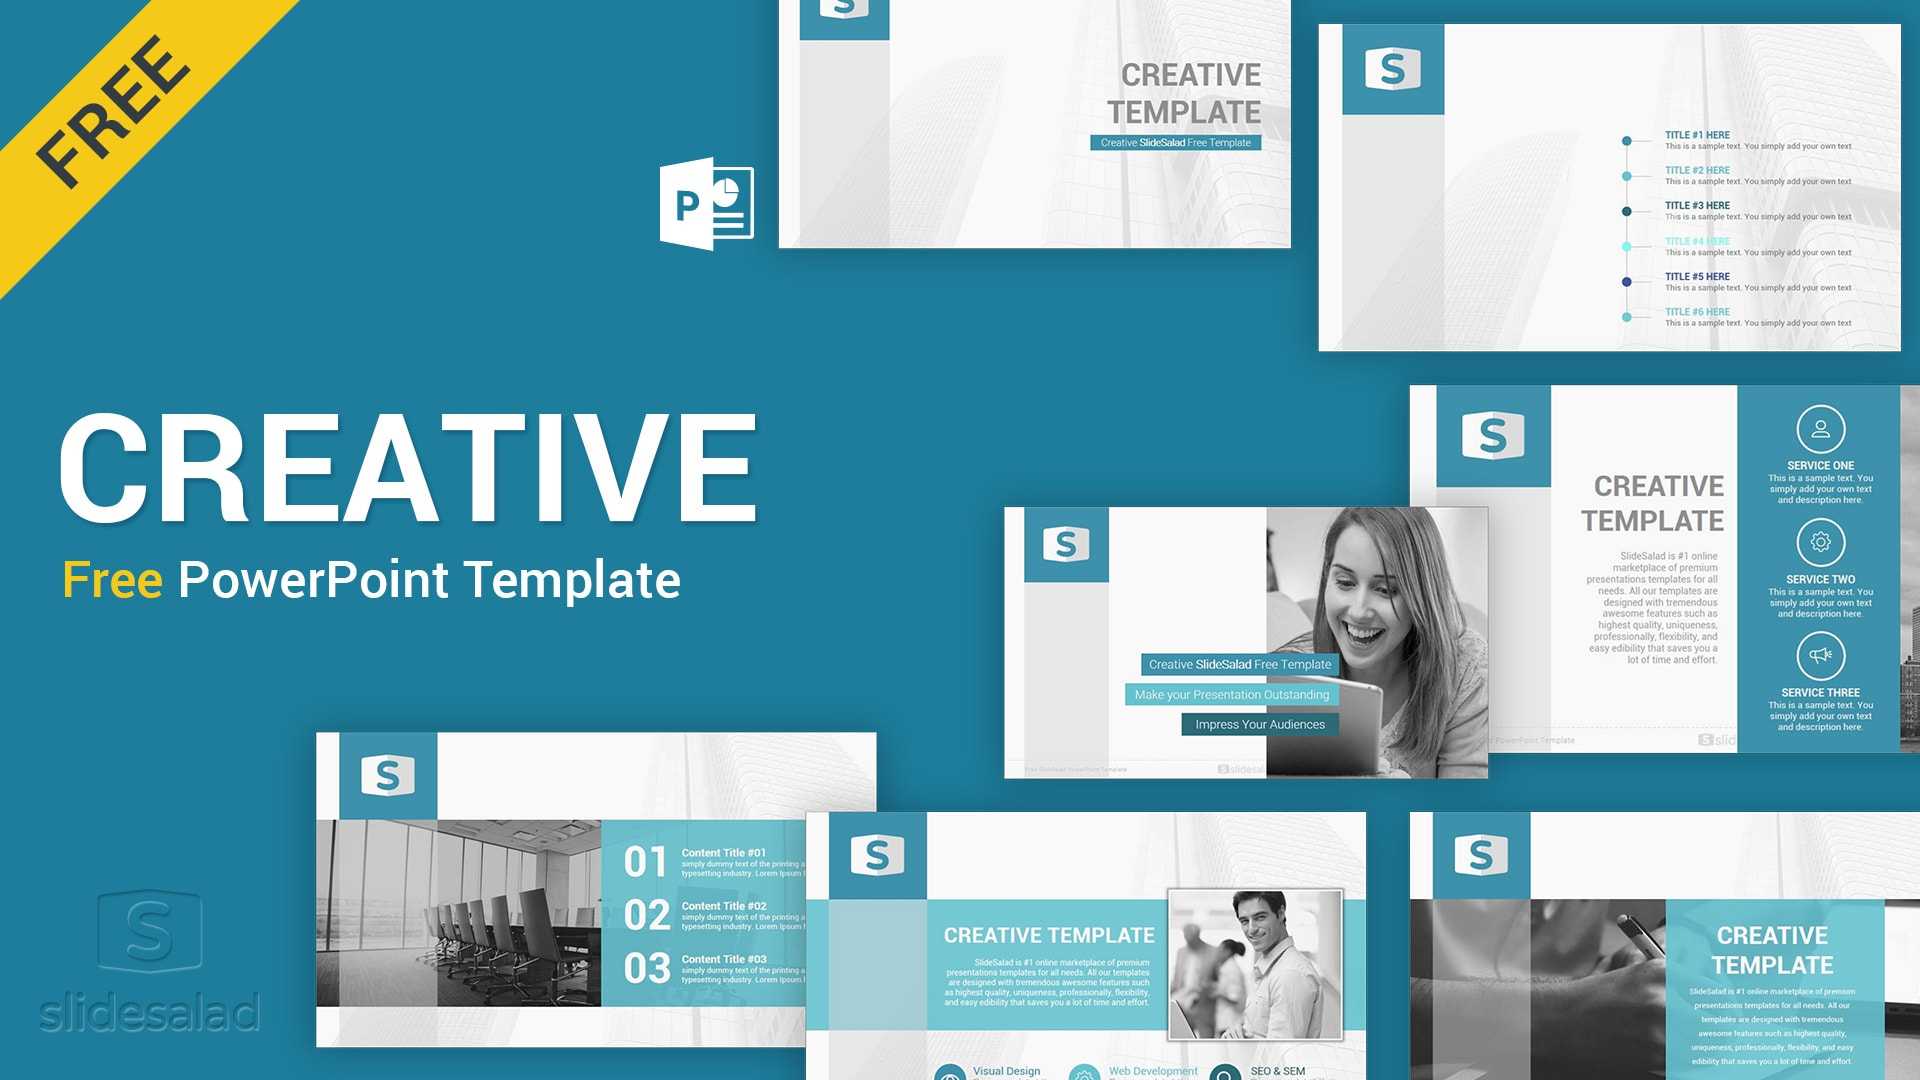 Creative Free Download Powerpoint Template – Slidesalad In Free Powerpoint Presentation Templates Downloads